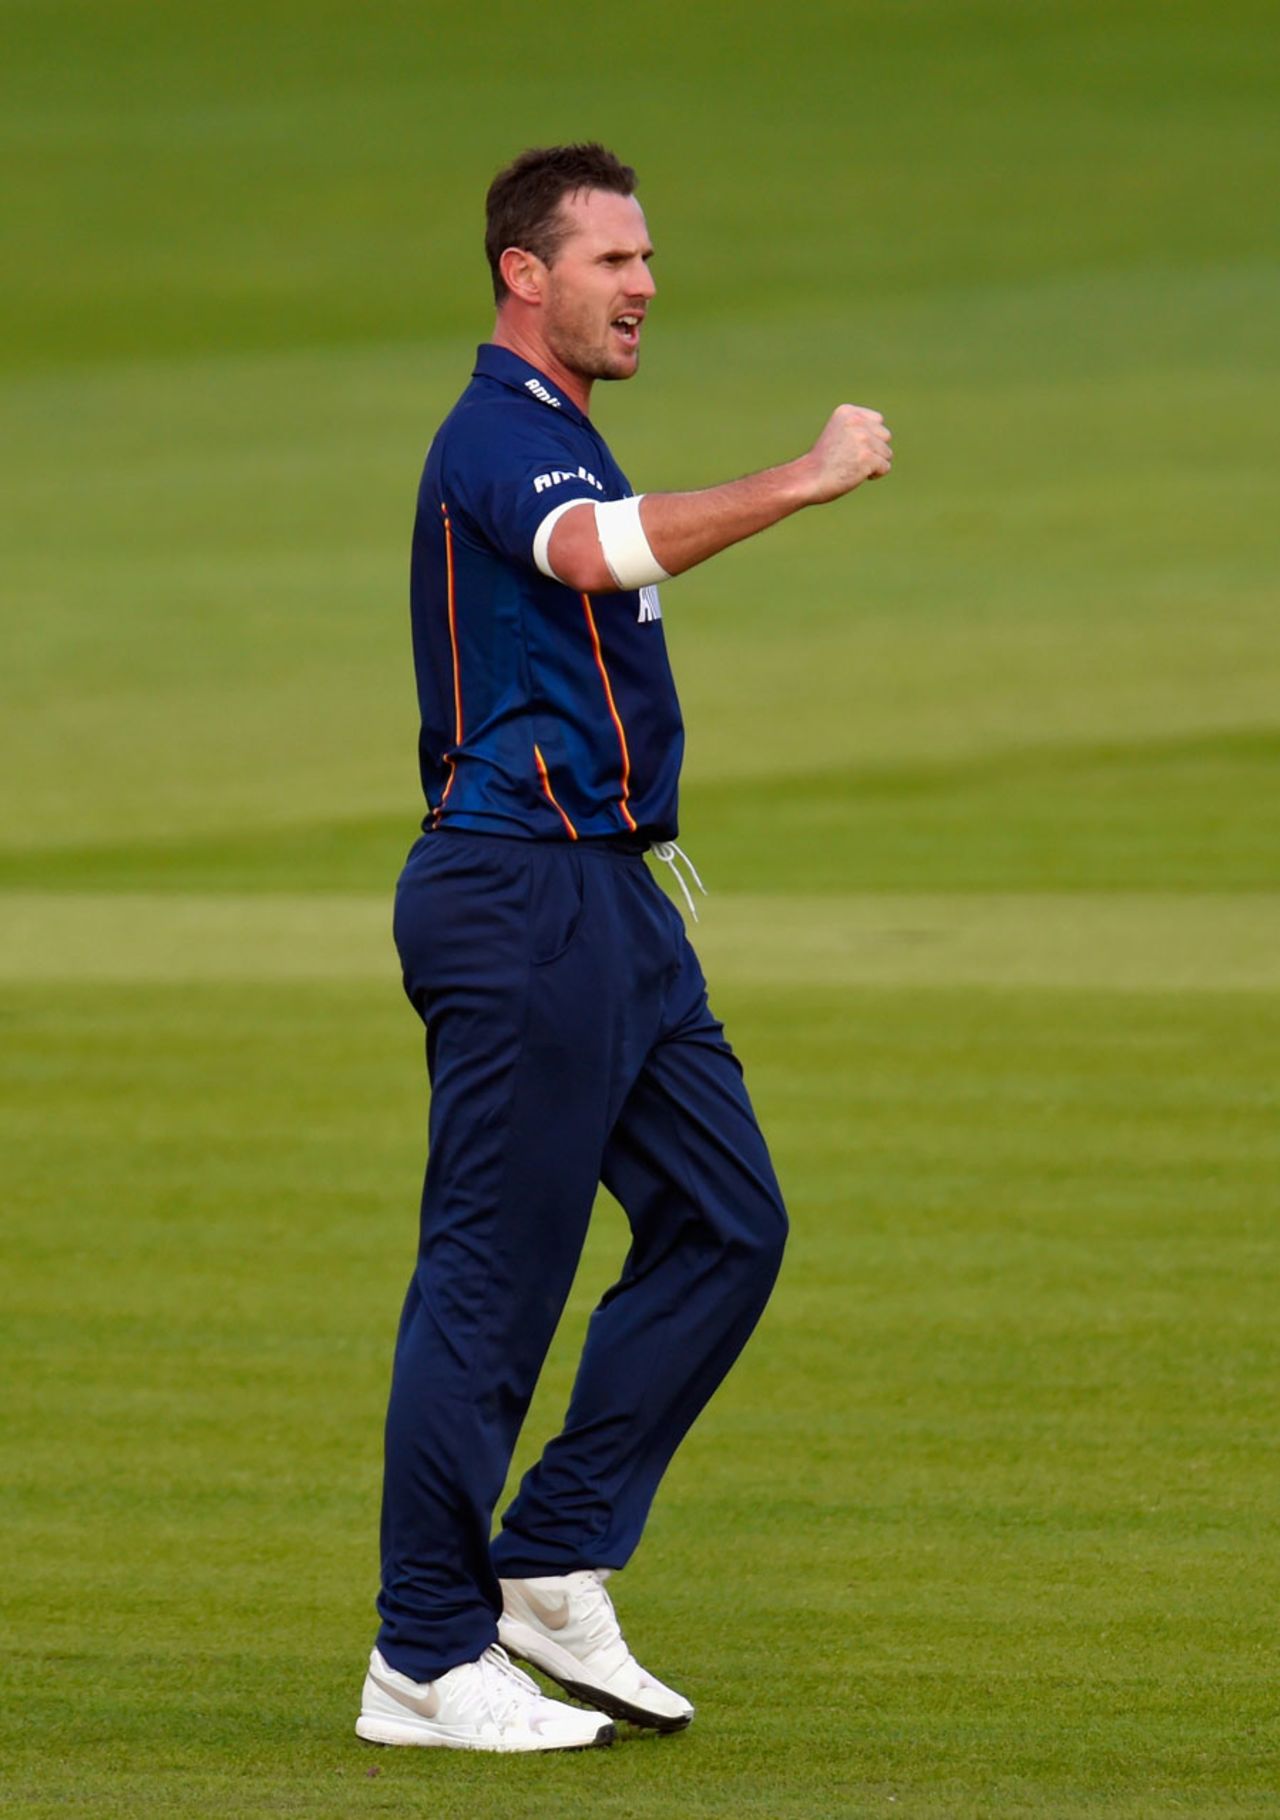 Shaun Tait picked up three wickets, Glamorgan v Essex, NatWest T20 Blast, South Group, Cardiff, May 22, 2015